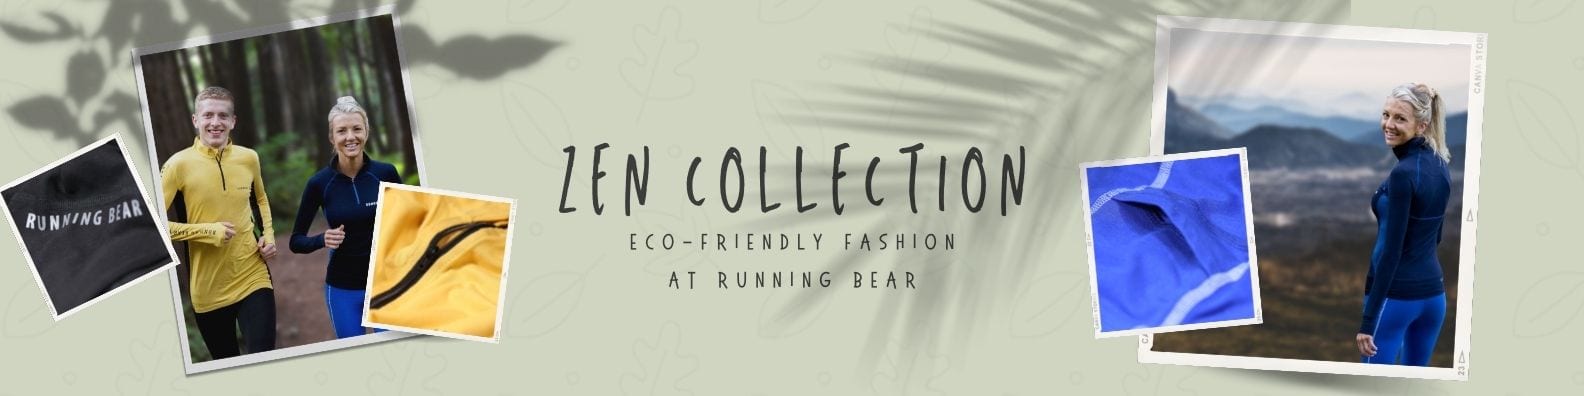 zen collection eco friendly fashion at running bear bamboo athletic wear